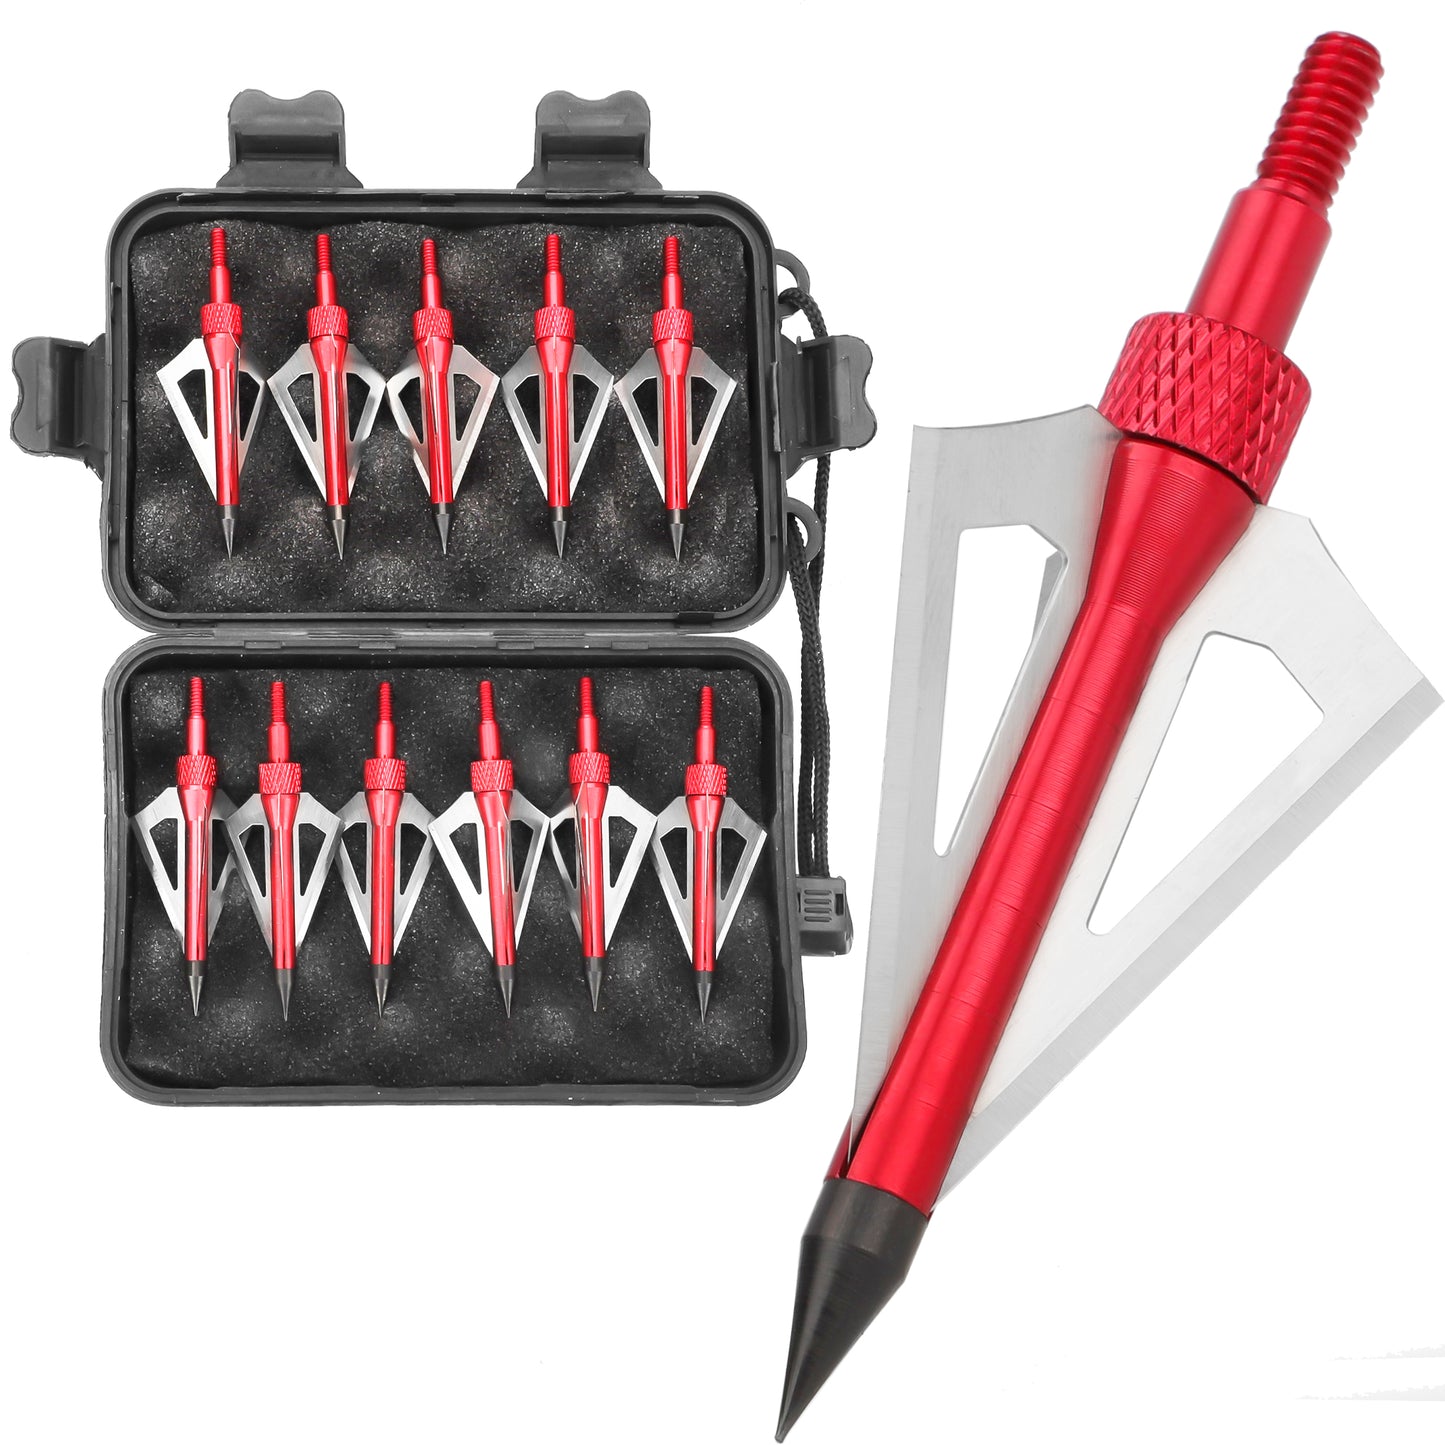 12 Pcs Hunting Archery Broadheads Set - 3 Blades Archery 100 Grain Screw-in Arrow Tips, Compatible with Crossbow Compound Bow